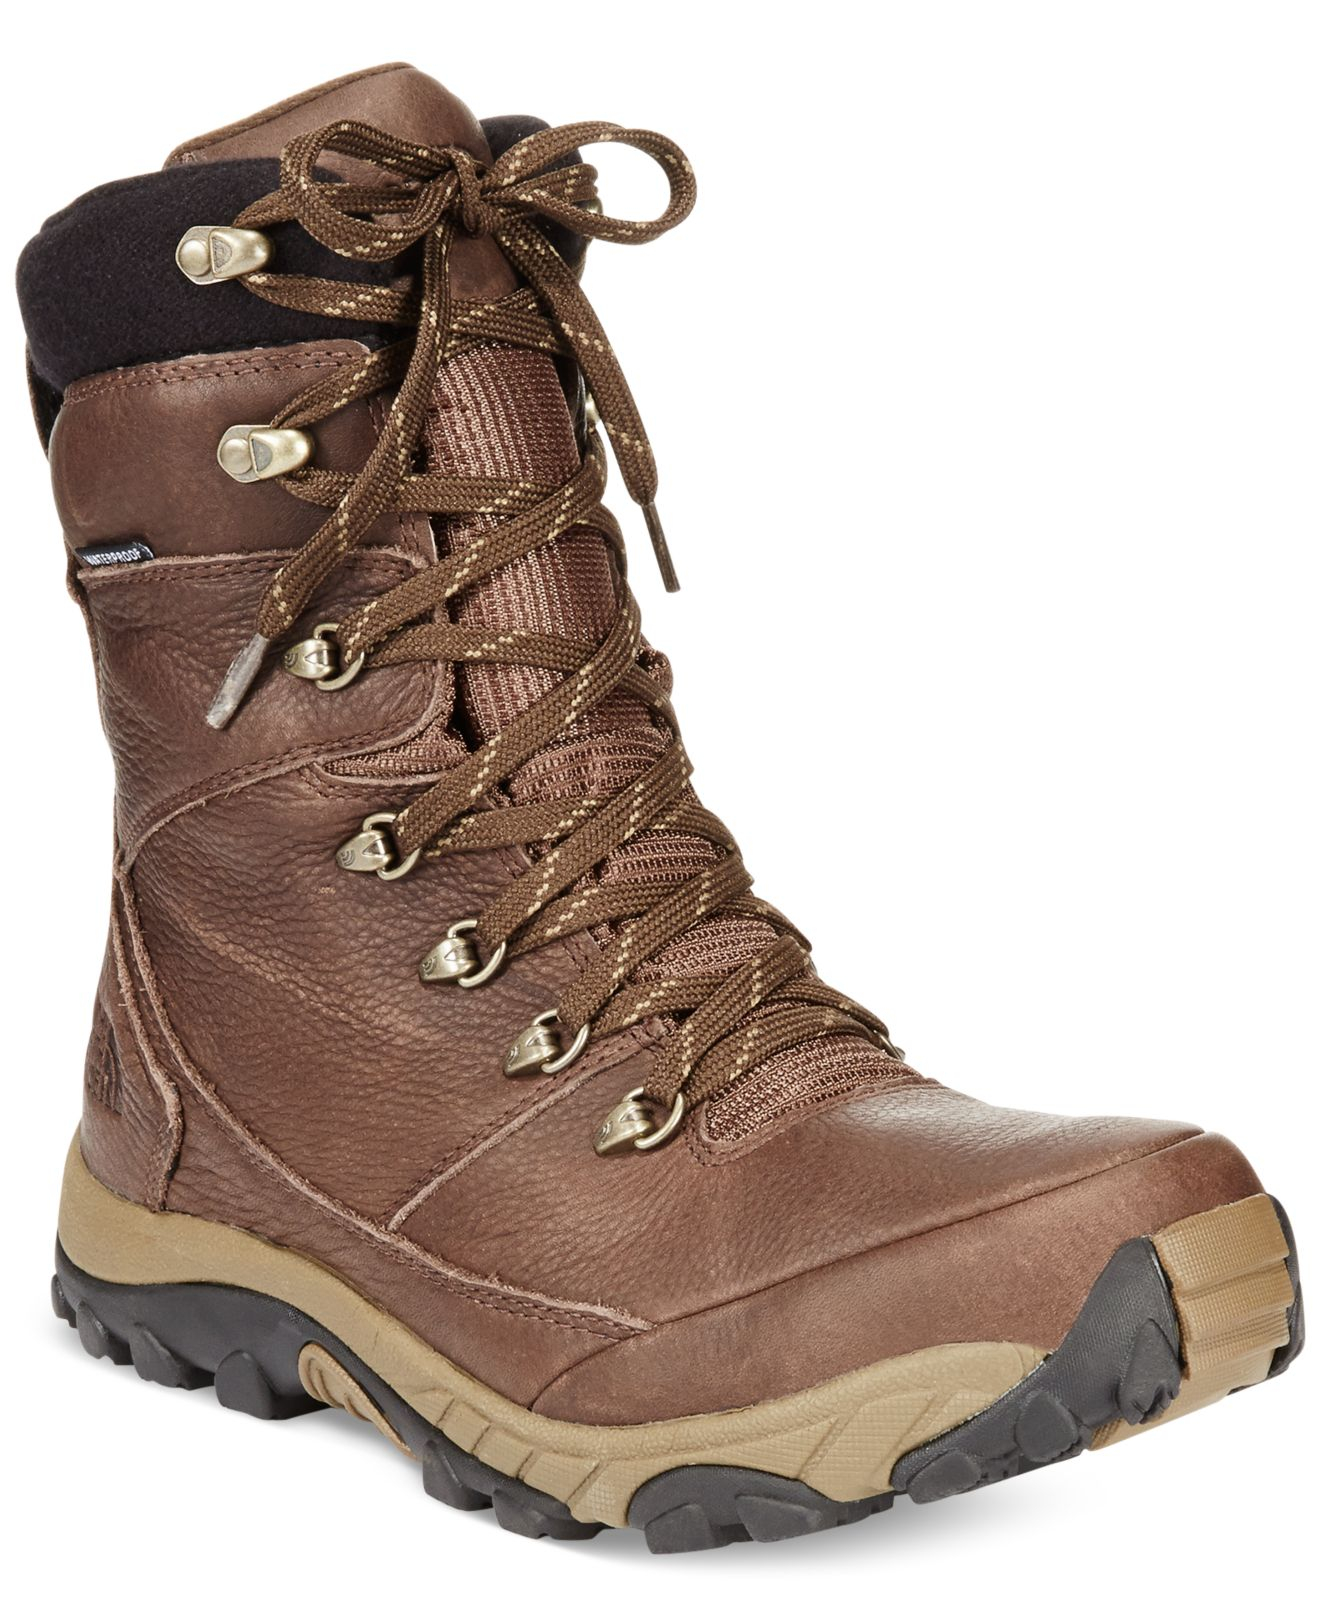 The North Face Chilkat Leather Insulated Tall Boots in Brown for Men - Lyst